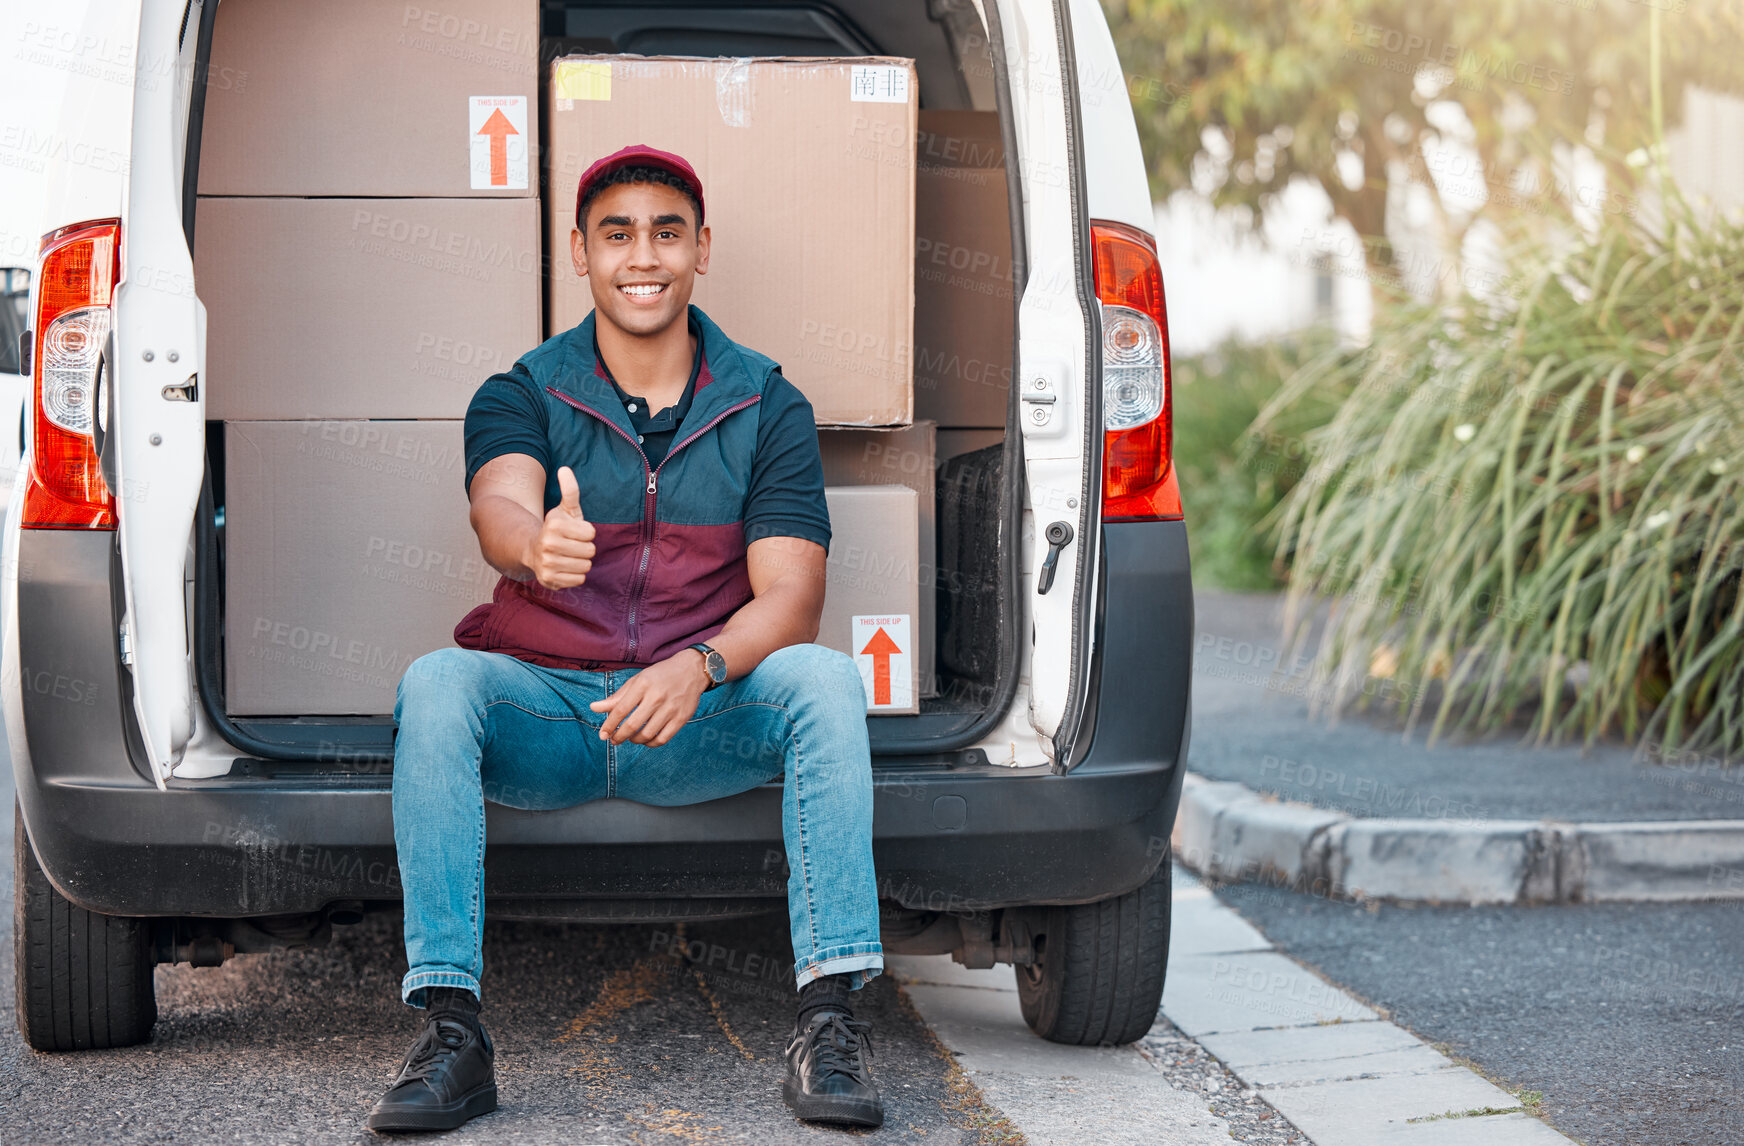 Buy stock photo Delivery, box and man in truck with thumbs up, trust and success in courier service for ecommerce business. Supply chain, cargo and logistics driver with smile in van with retail stock for transport.